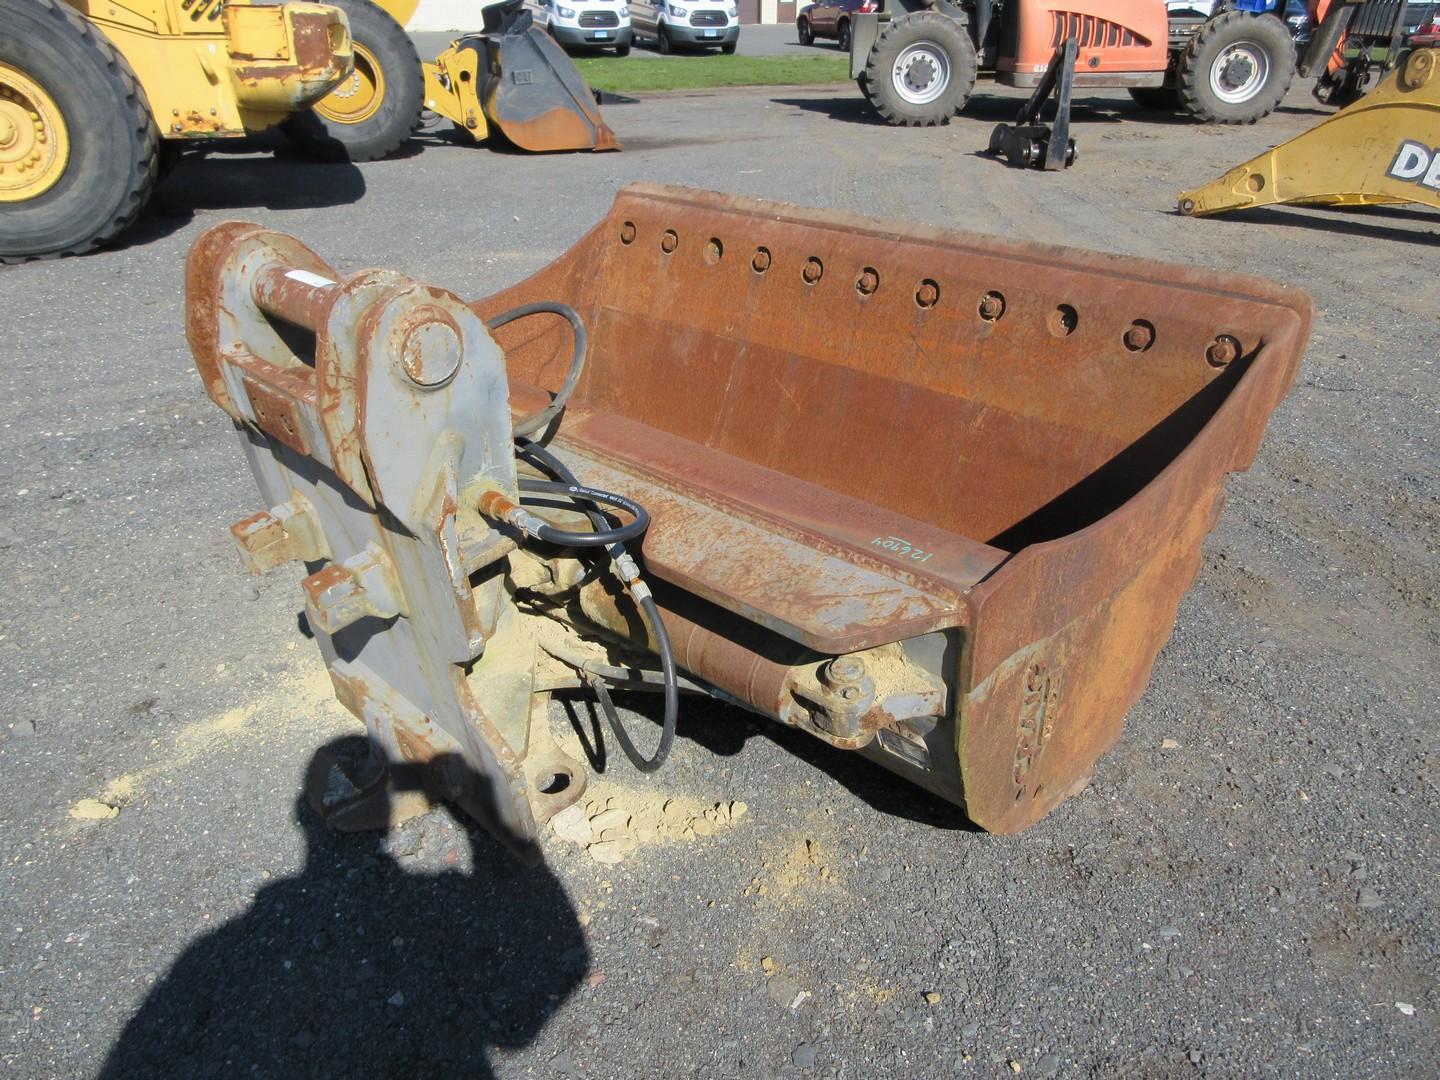 Craig 72" Hyd Tilting Cleanup Bucket With BOCE